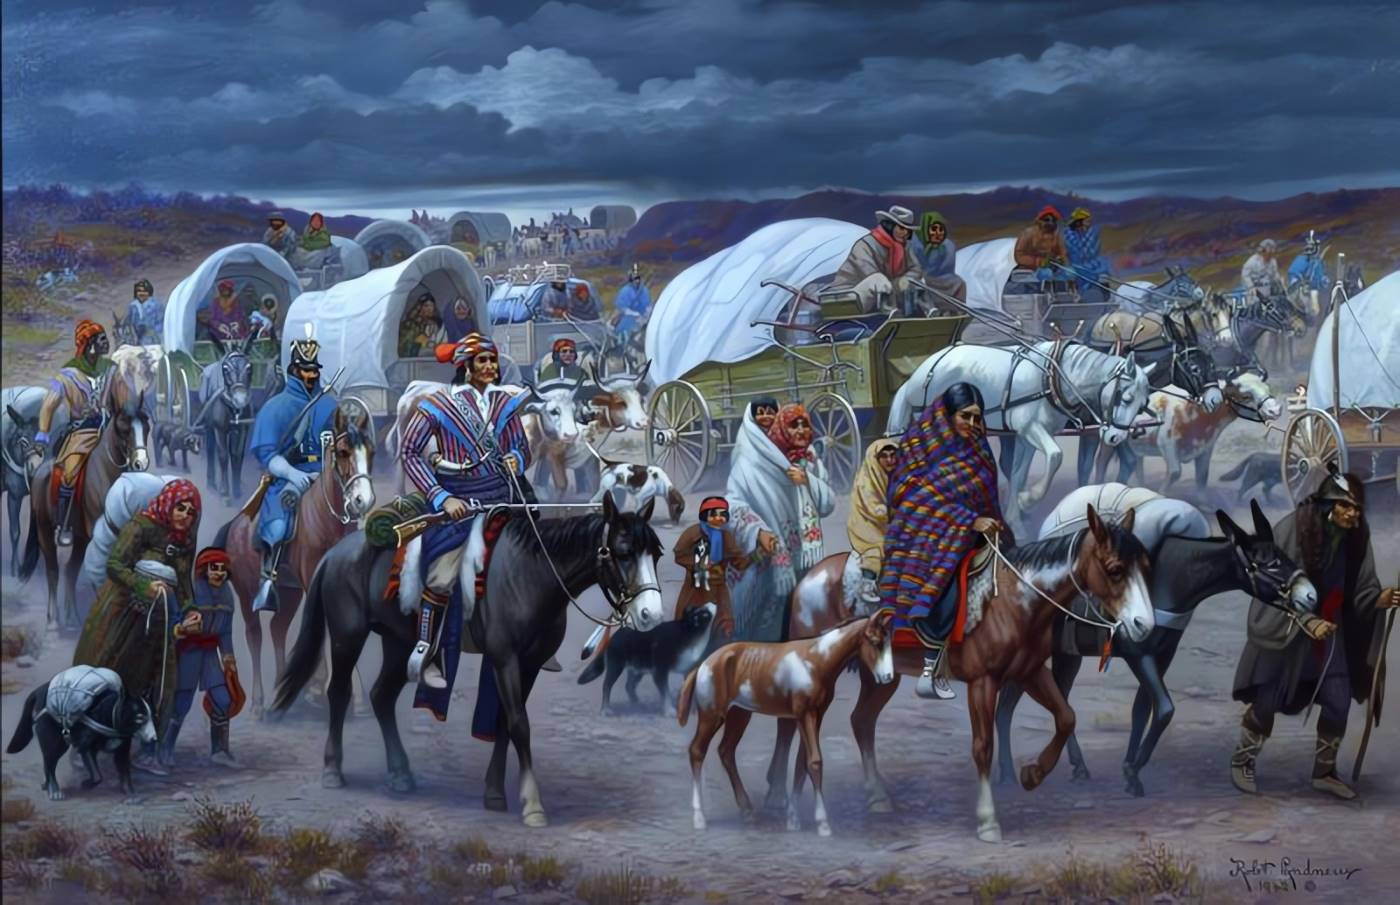 The Trail of Tears: A Native Odyssey